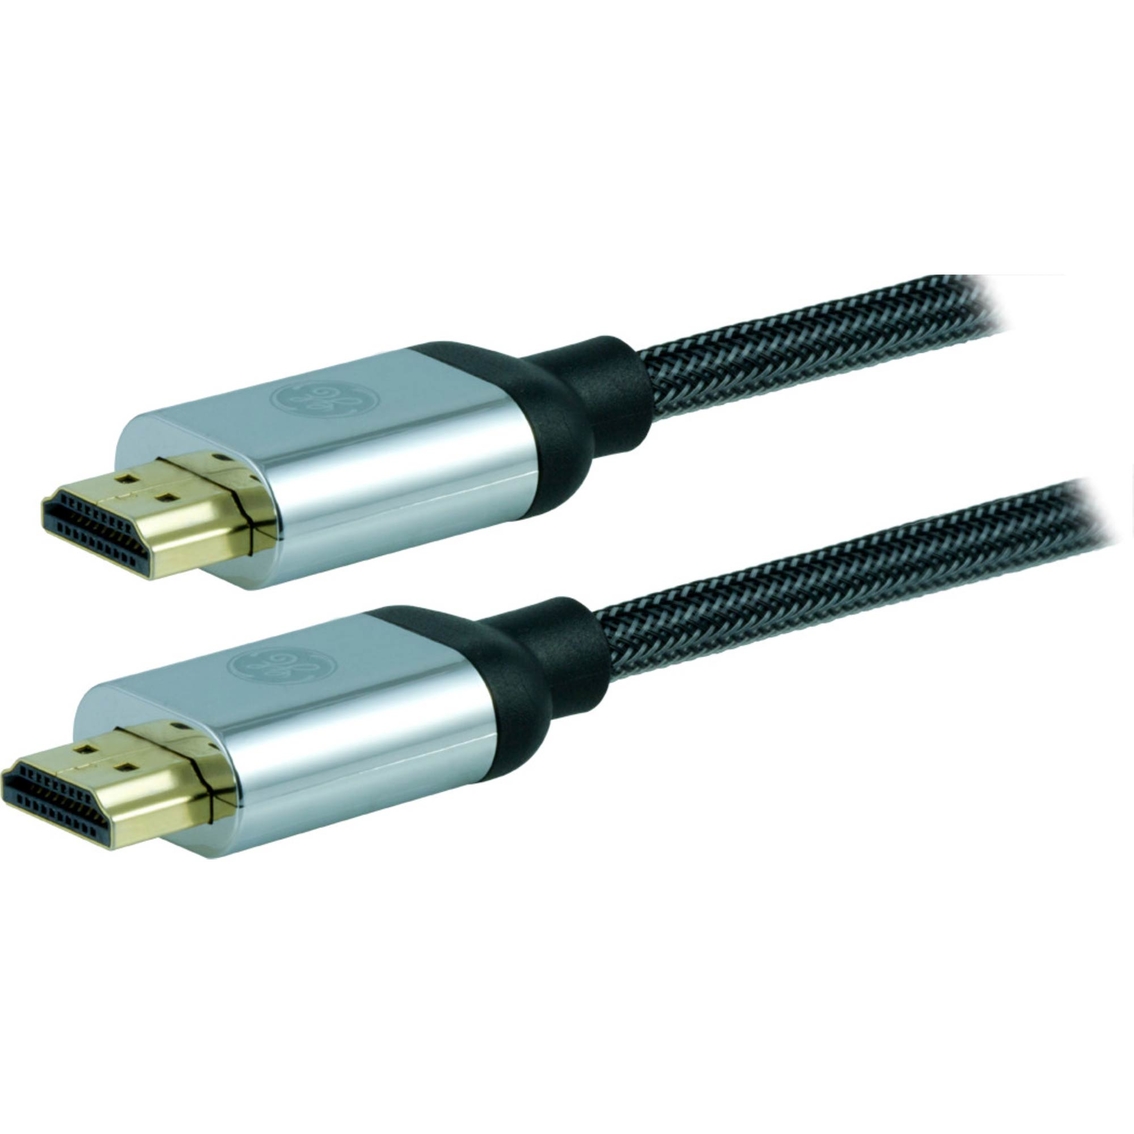 GE UltraPro Premium Braided HDMI 4K Cable 6 ft. - Image 4 of 4